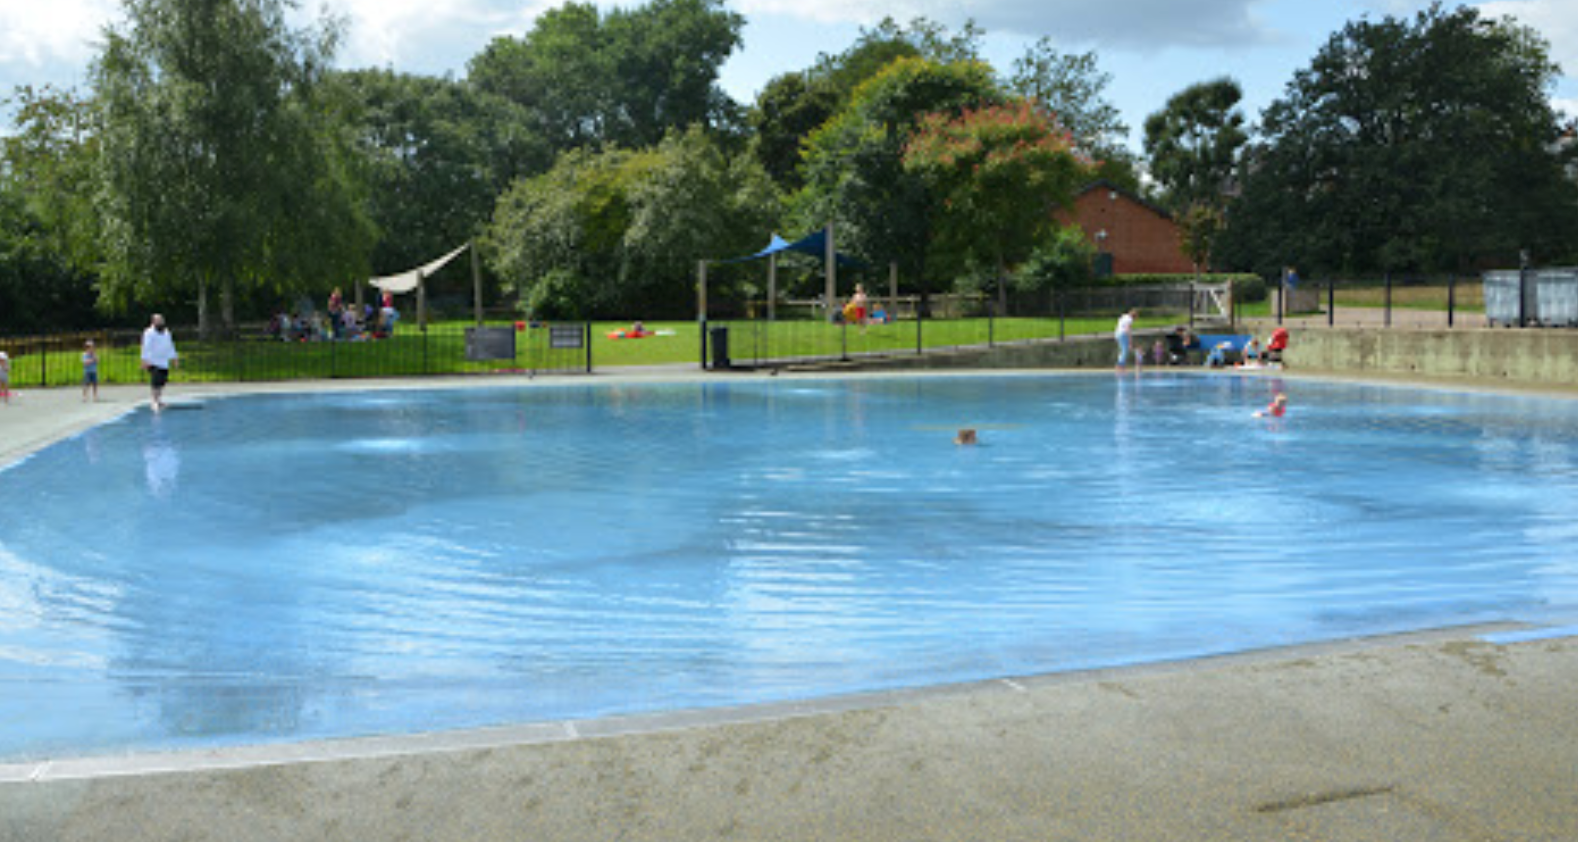 Parliament Hill Playground and Paddling Pool